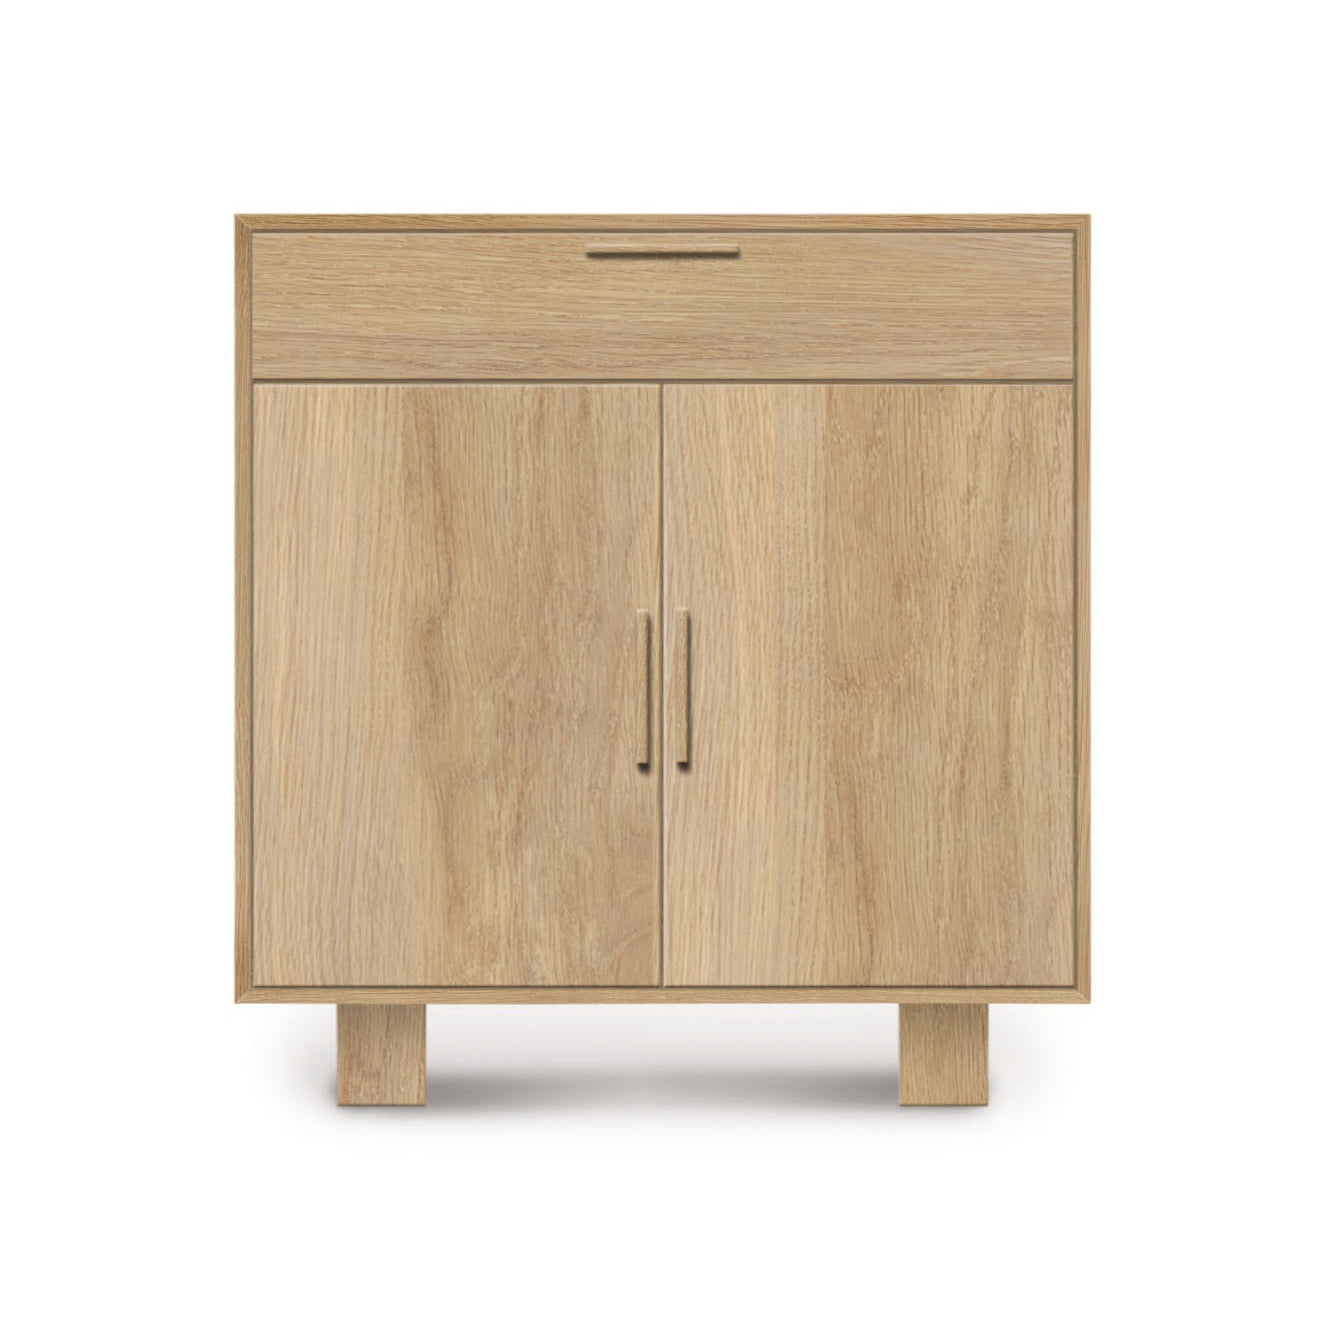 A Iso 2 Door, 1 Drawer Buffet with a Mid-Century Modern Style, set against a white background.